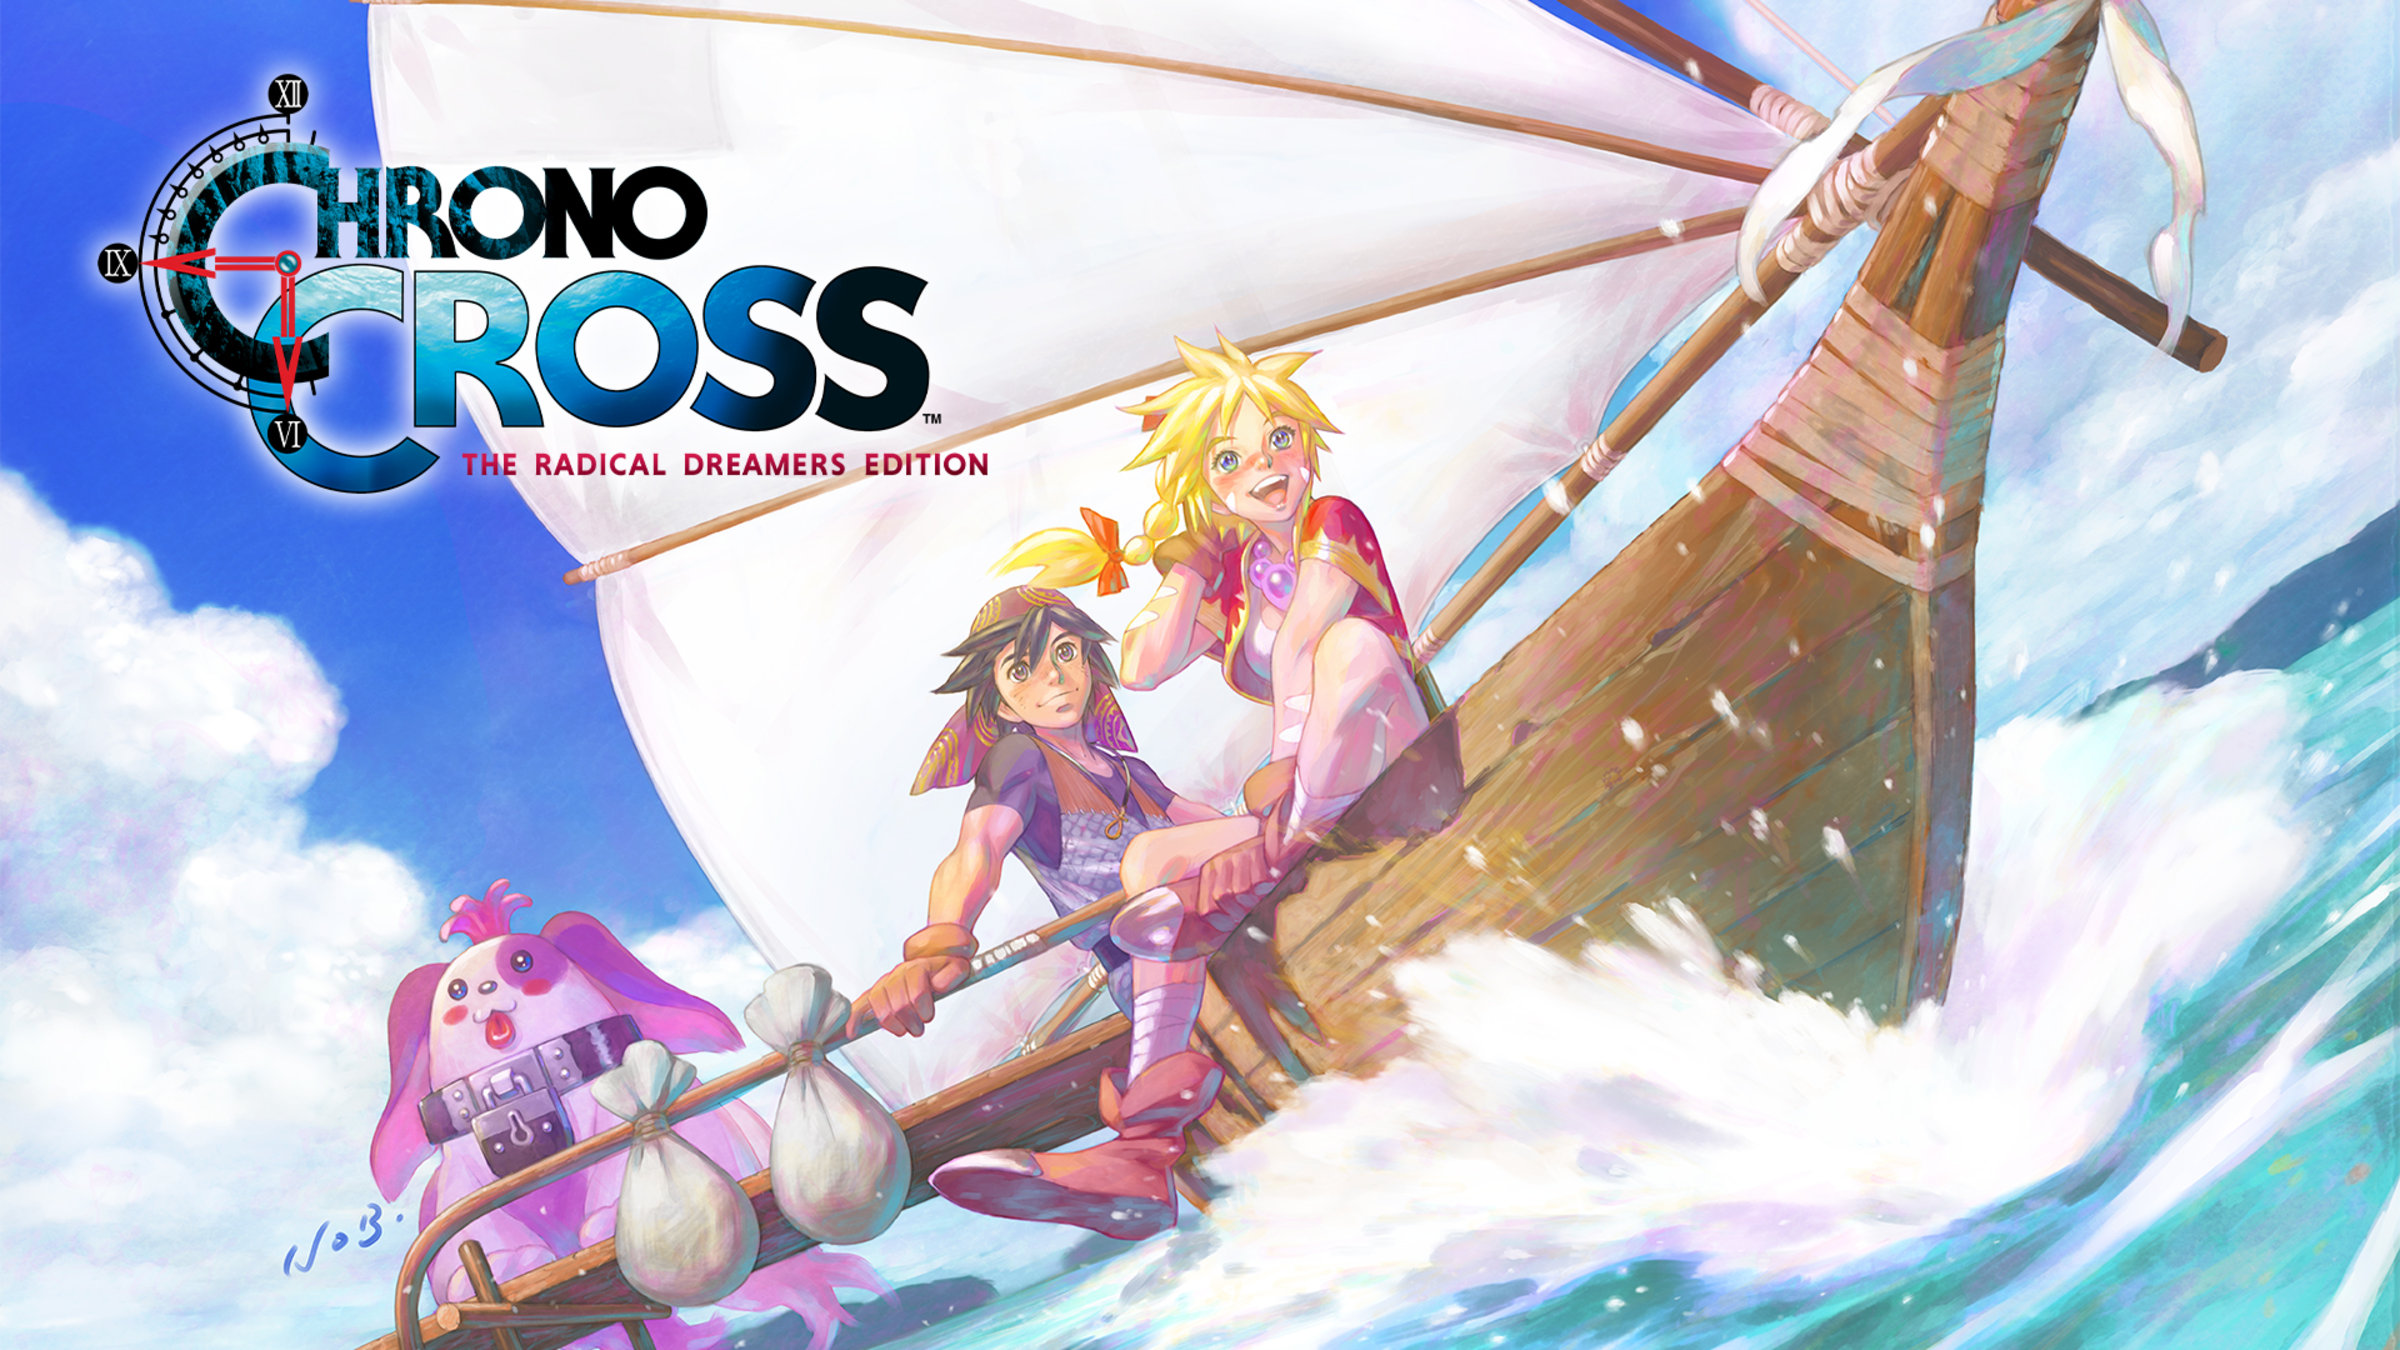 CHRONO CROSS: THE RADICAL DREAMERS EDITION for Nintendo Switch - Nintendo Official Site